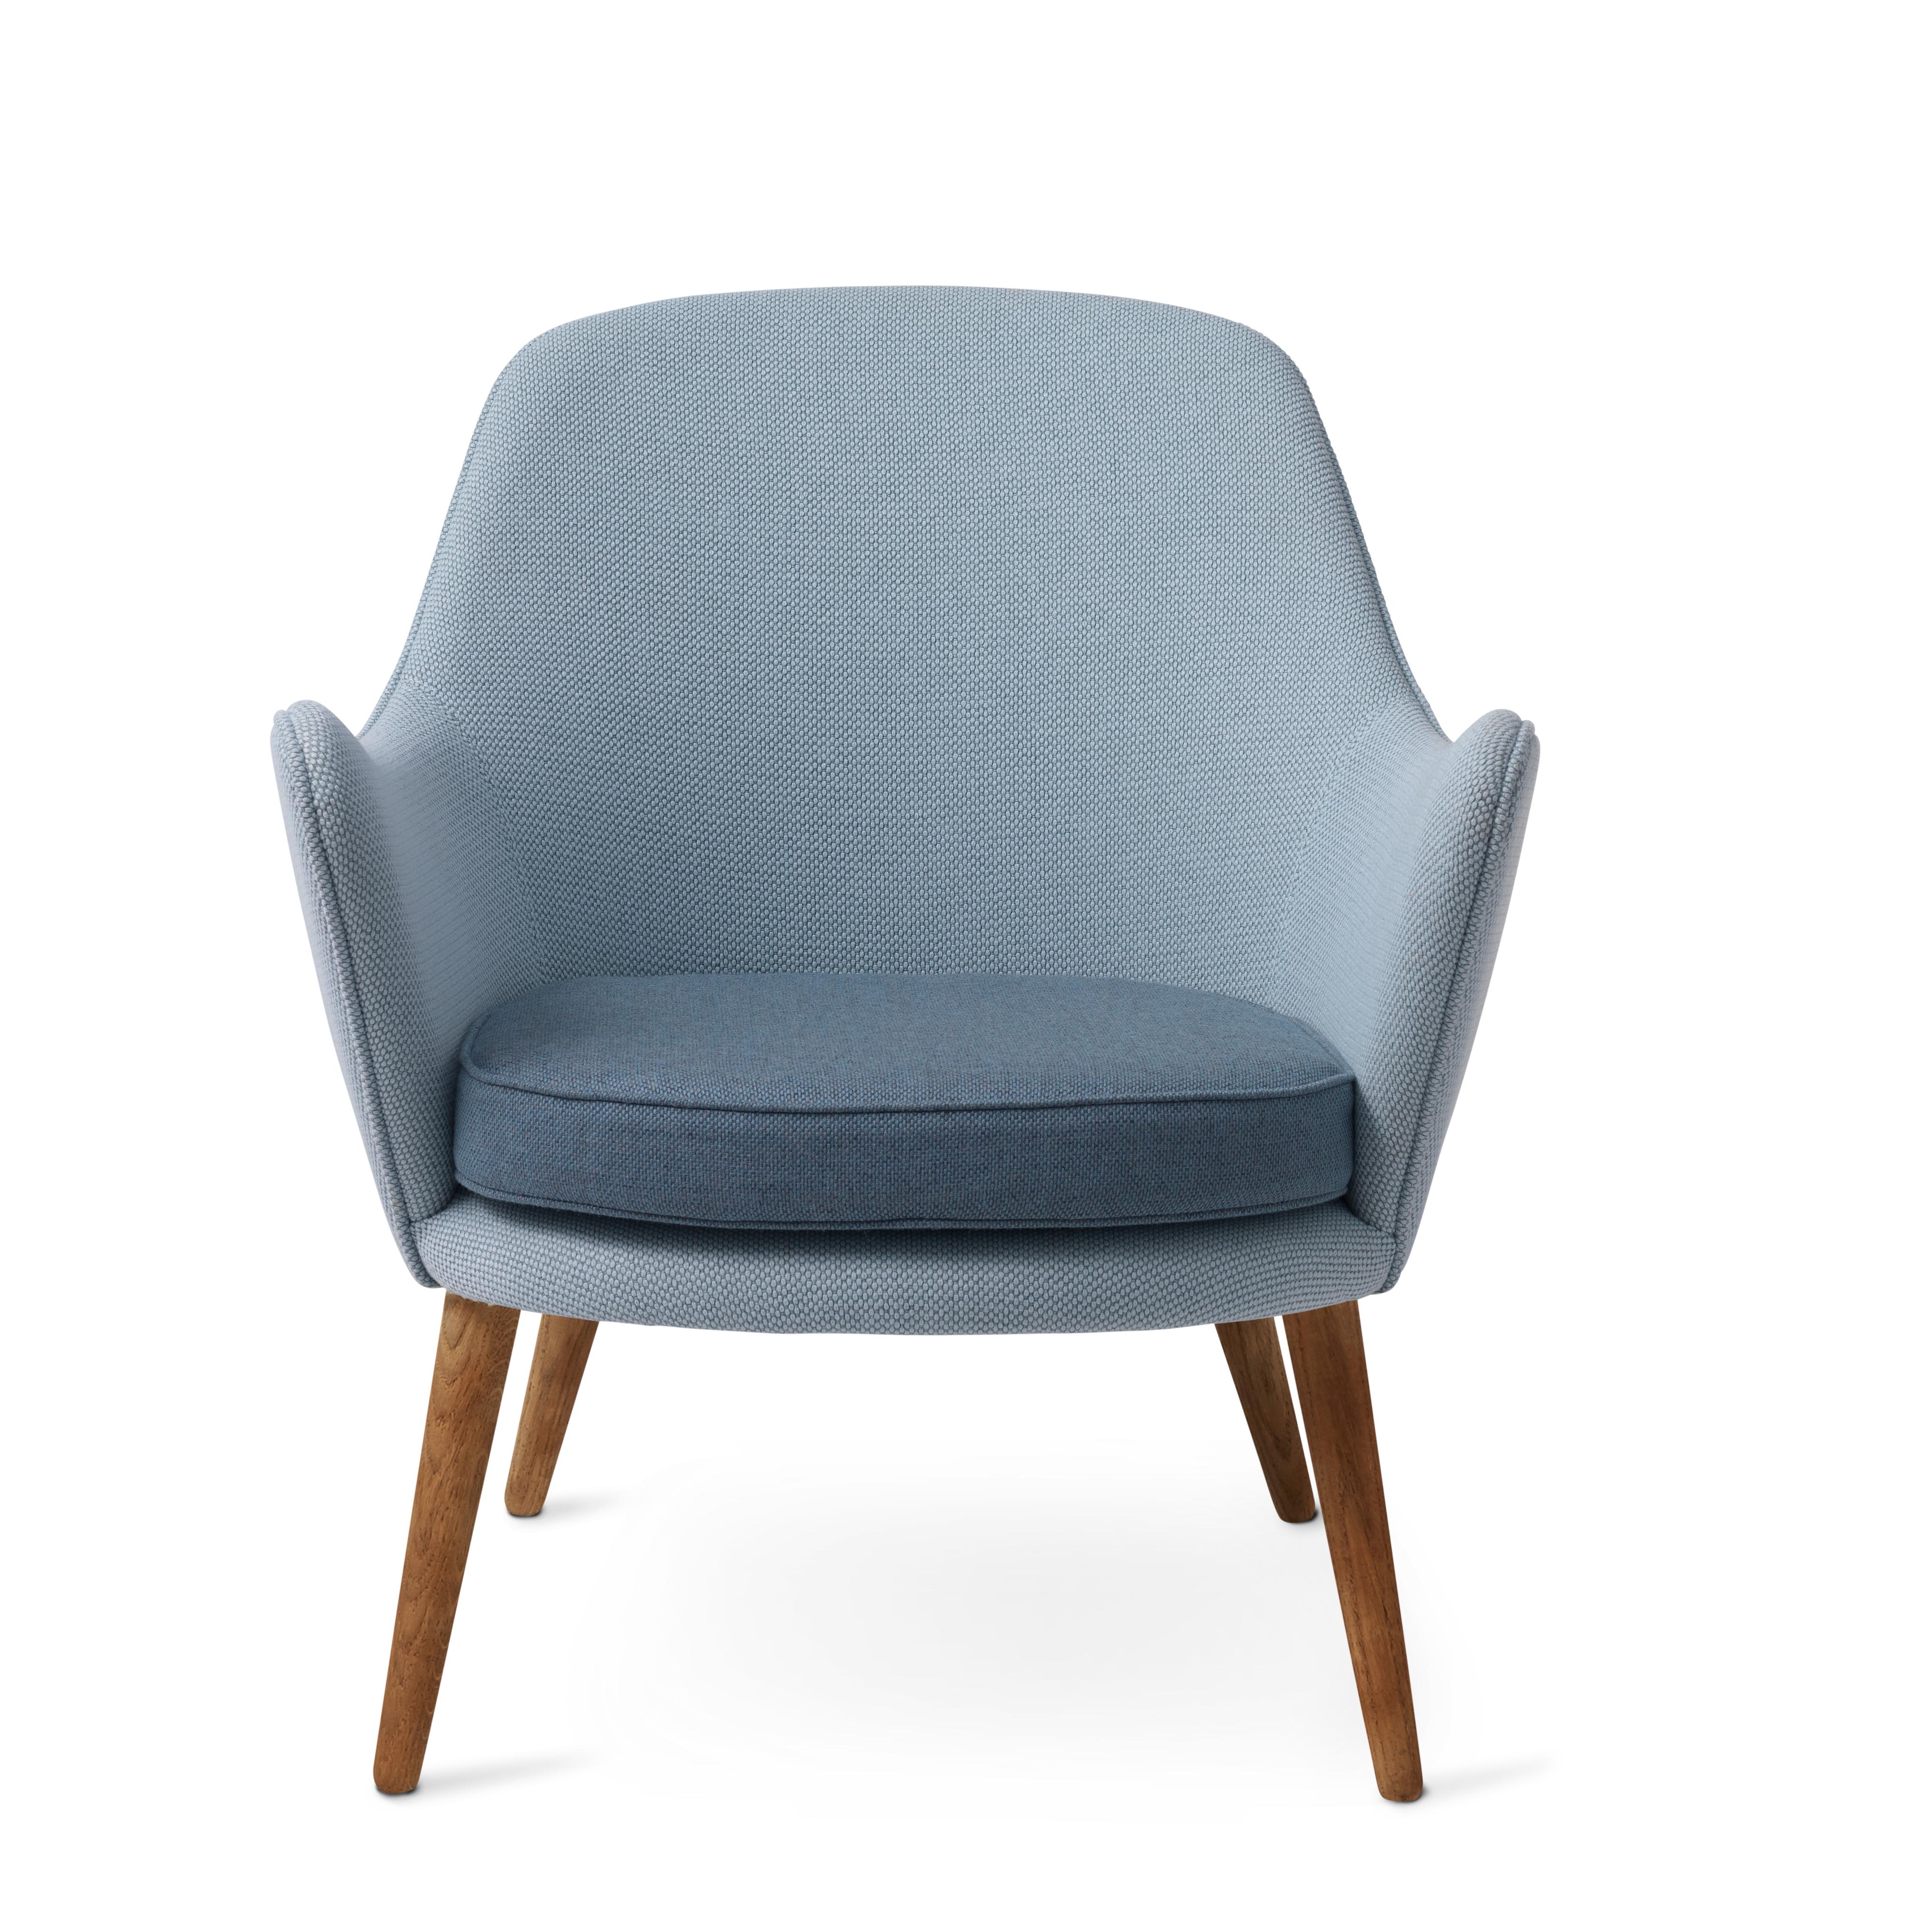 For Sale: Blue (Merit014/Rewool 768) Dwell Lounge Chair, by Hans Olsen from Warm Nordic